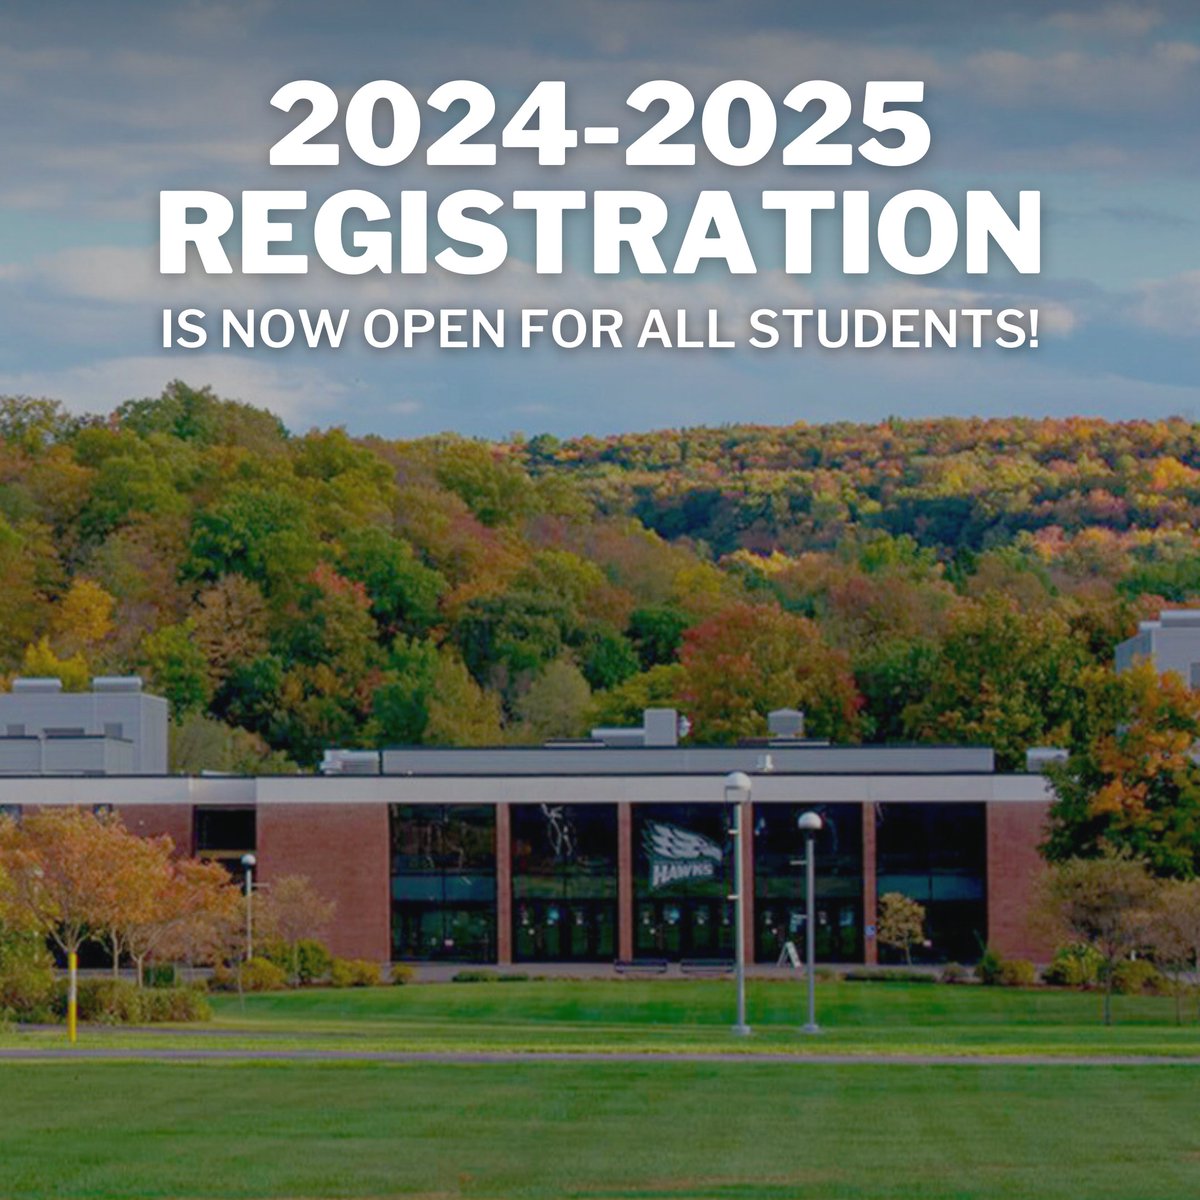 Registration for the 2024-25 academic year is now open for all students! Register now to make sure you get the schedule you want. To see course offerings, visit www2.mvcc.edu/courses/